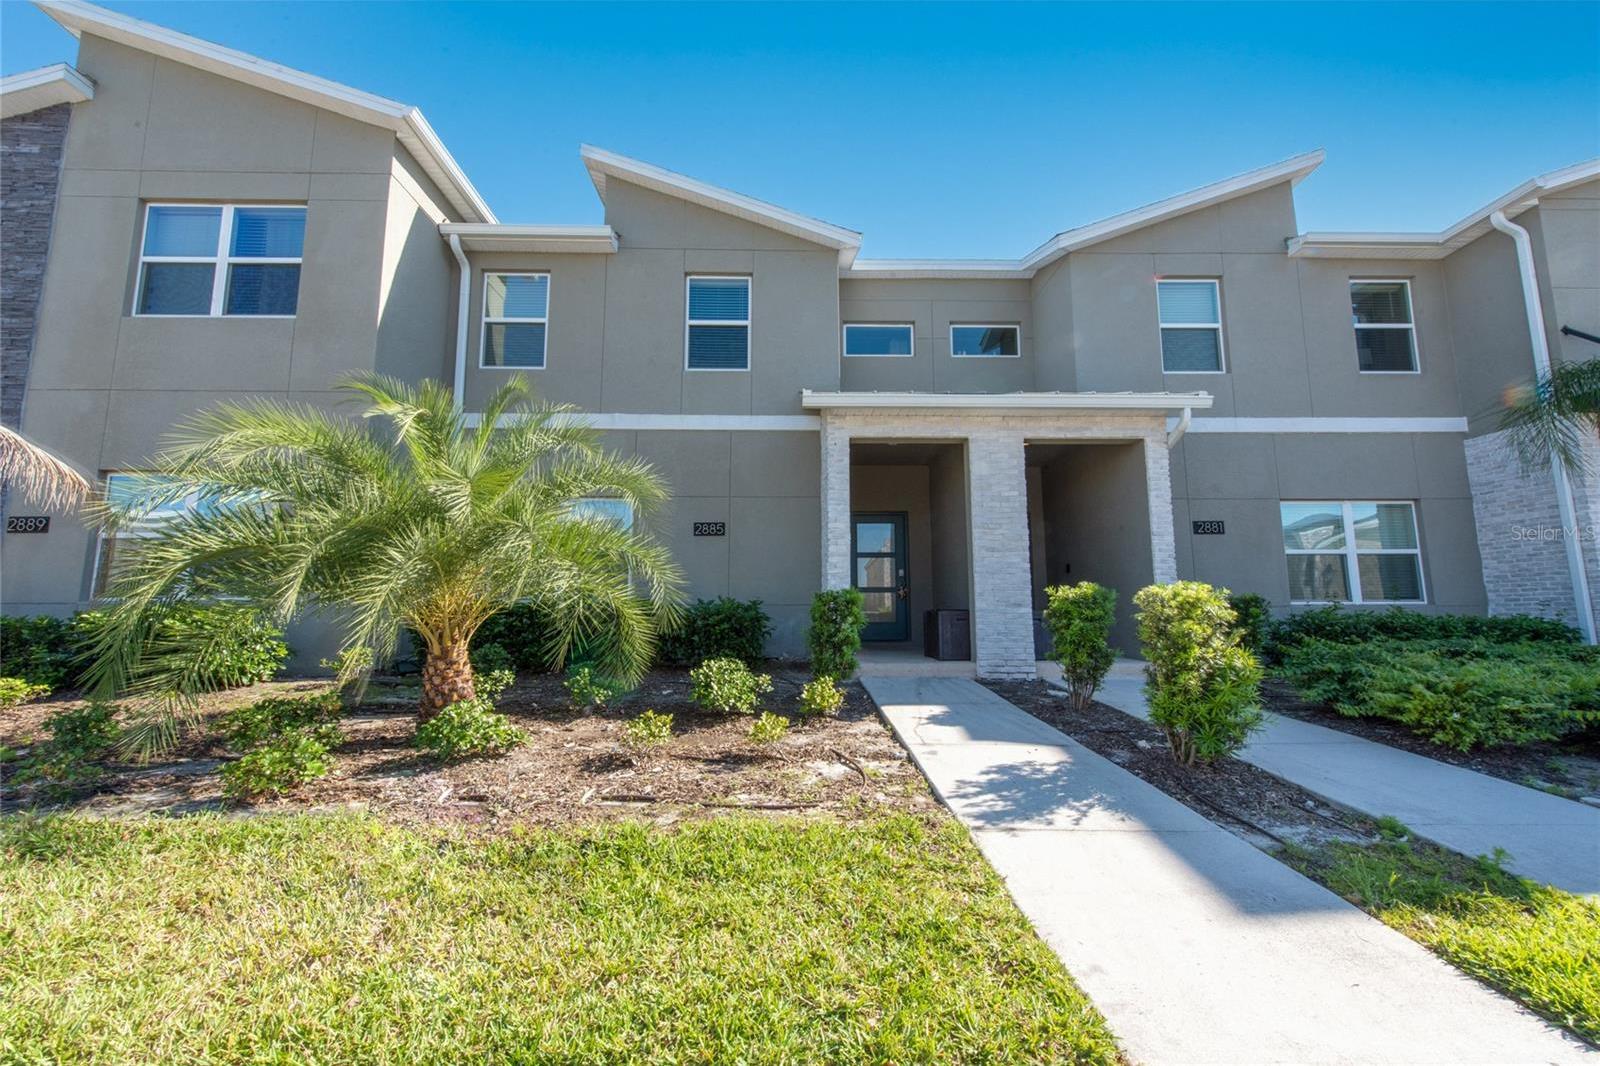 Photo one of 2885 Simile St Kissimmee FL 34746 | MLS S5102230